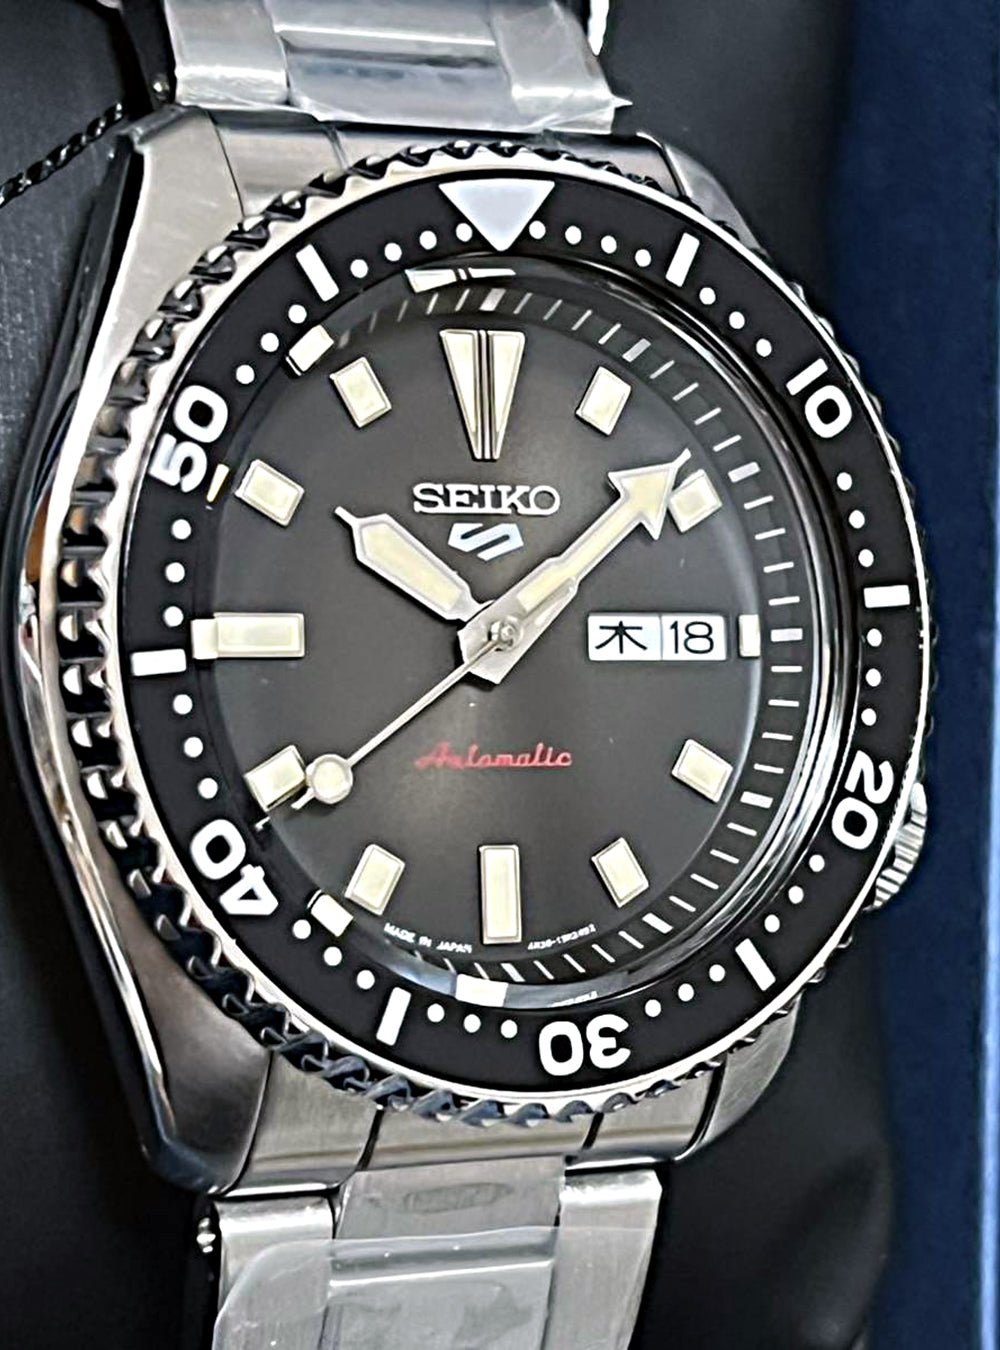 SEIKO 5 SPORTS x NANO UNIVERSE VINTAGE WATCH SBSA187 MADE IN JAPAN LIMITED EDITIONjapan-select4550320887134WRISTWATCHSEIKO